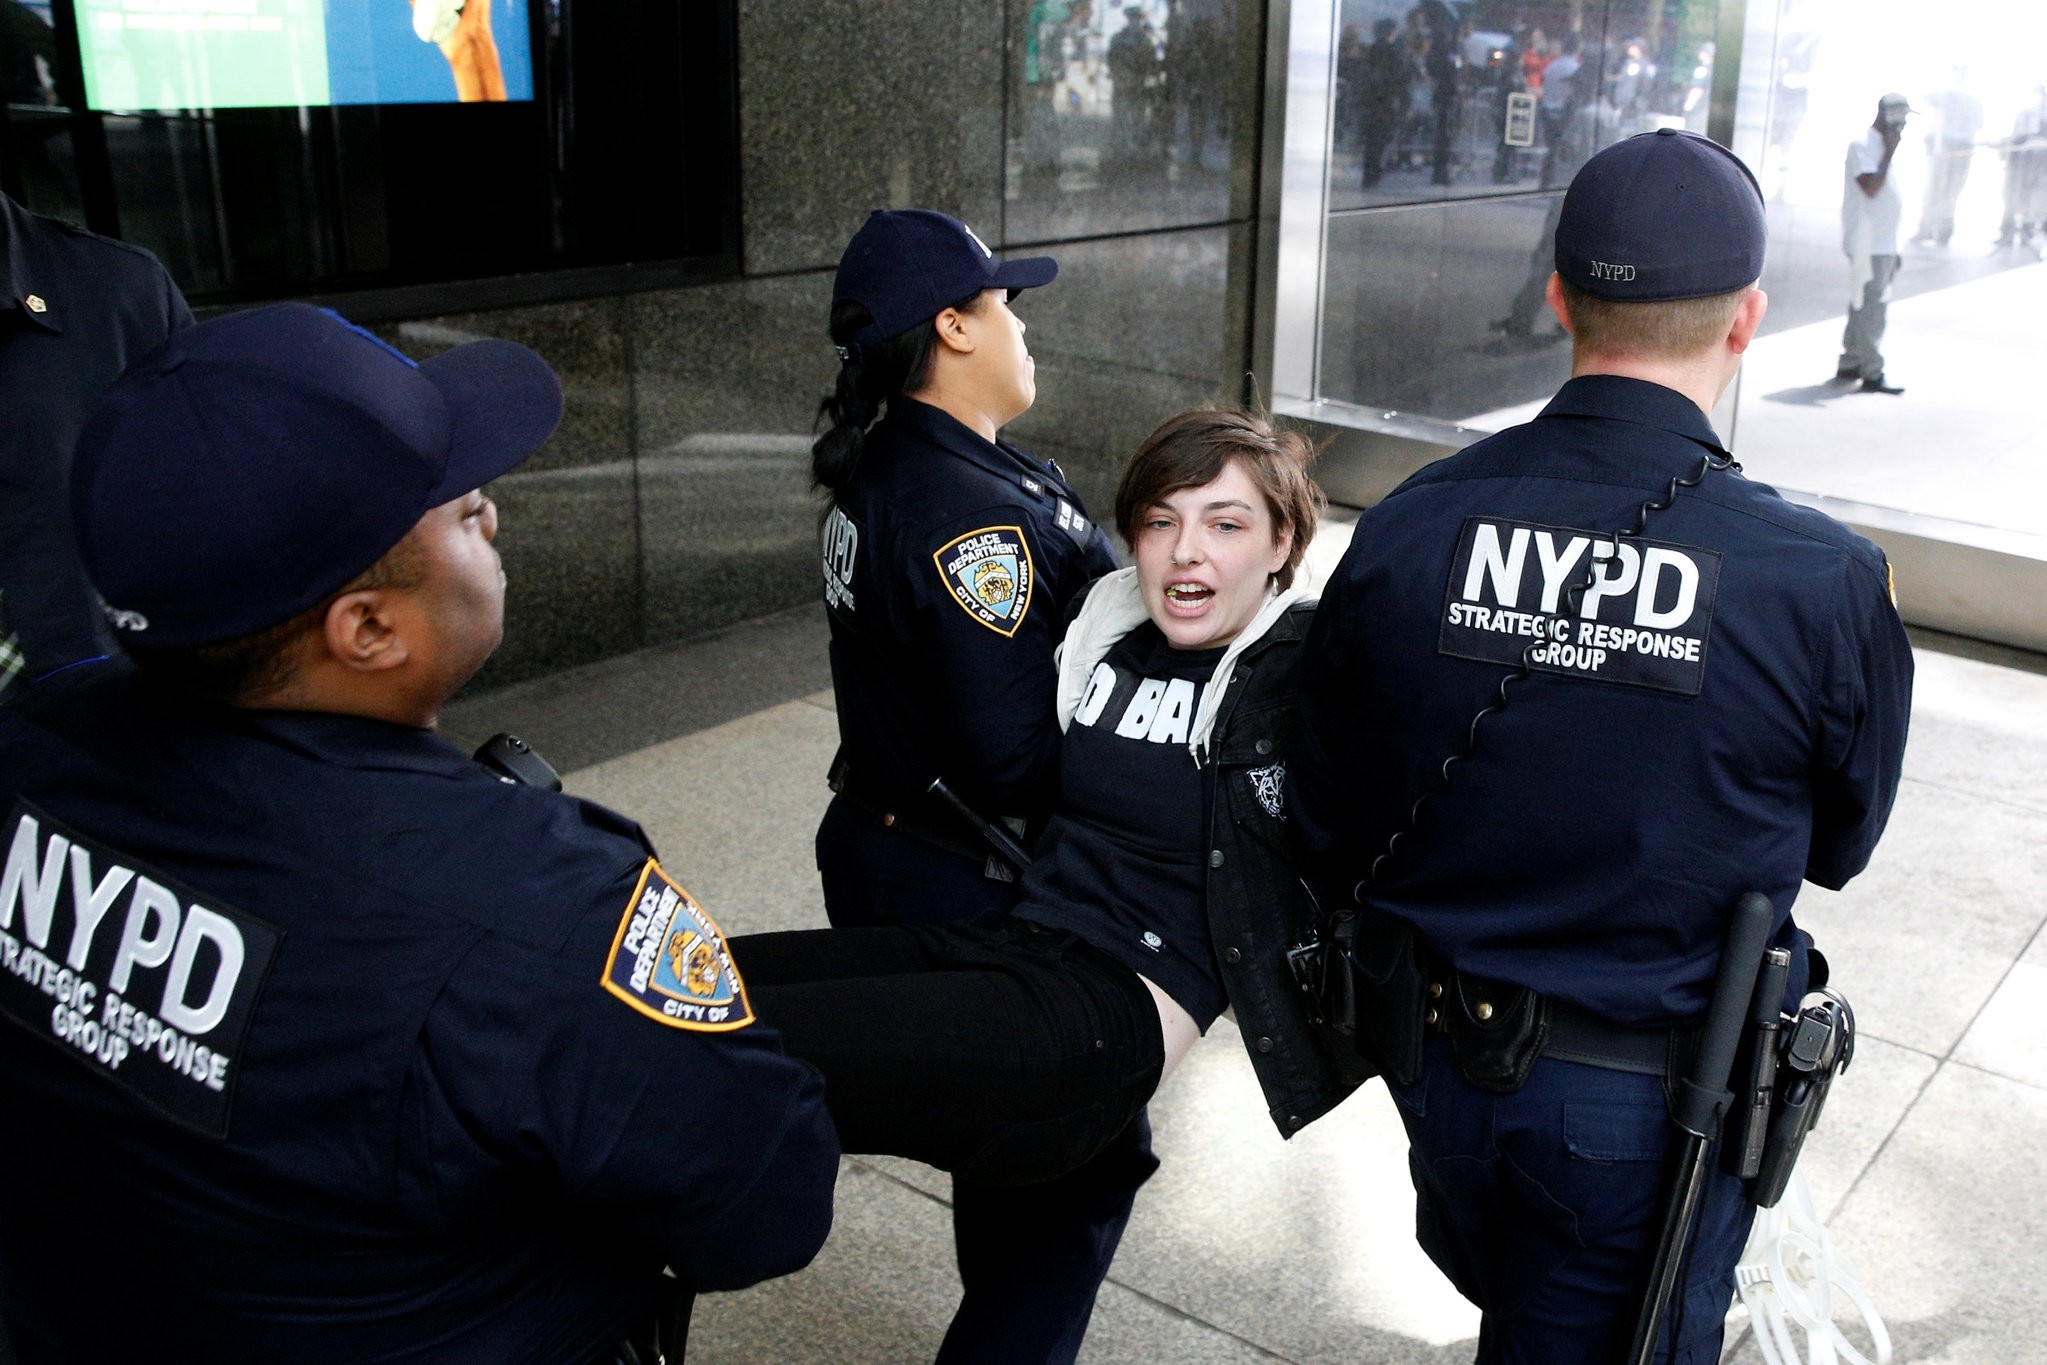 New York City Police officers (NYPD) carry a protestor after making arrests for demonstrating in Trump Tower in New York City, U.S., April 13, 2017. (Reuters Photo)